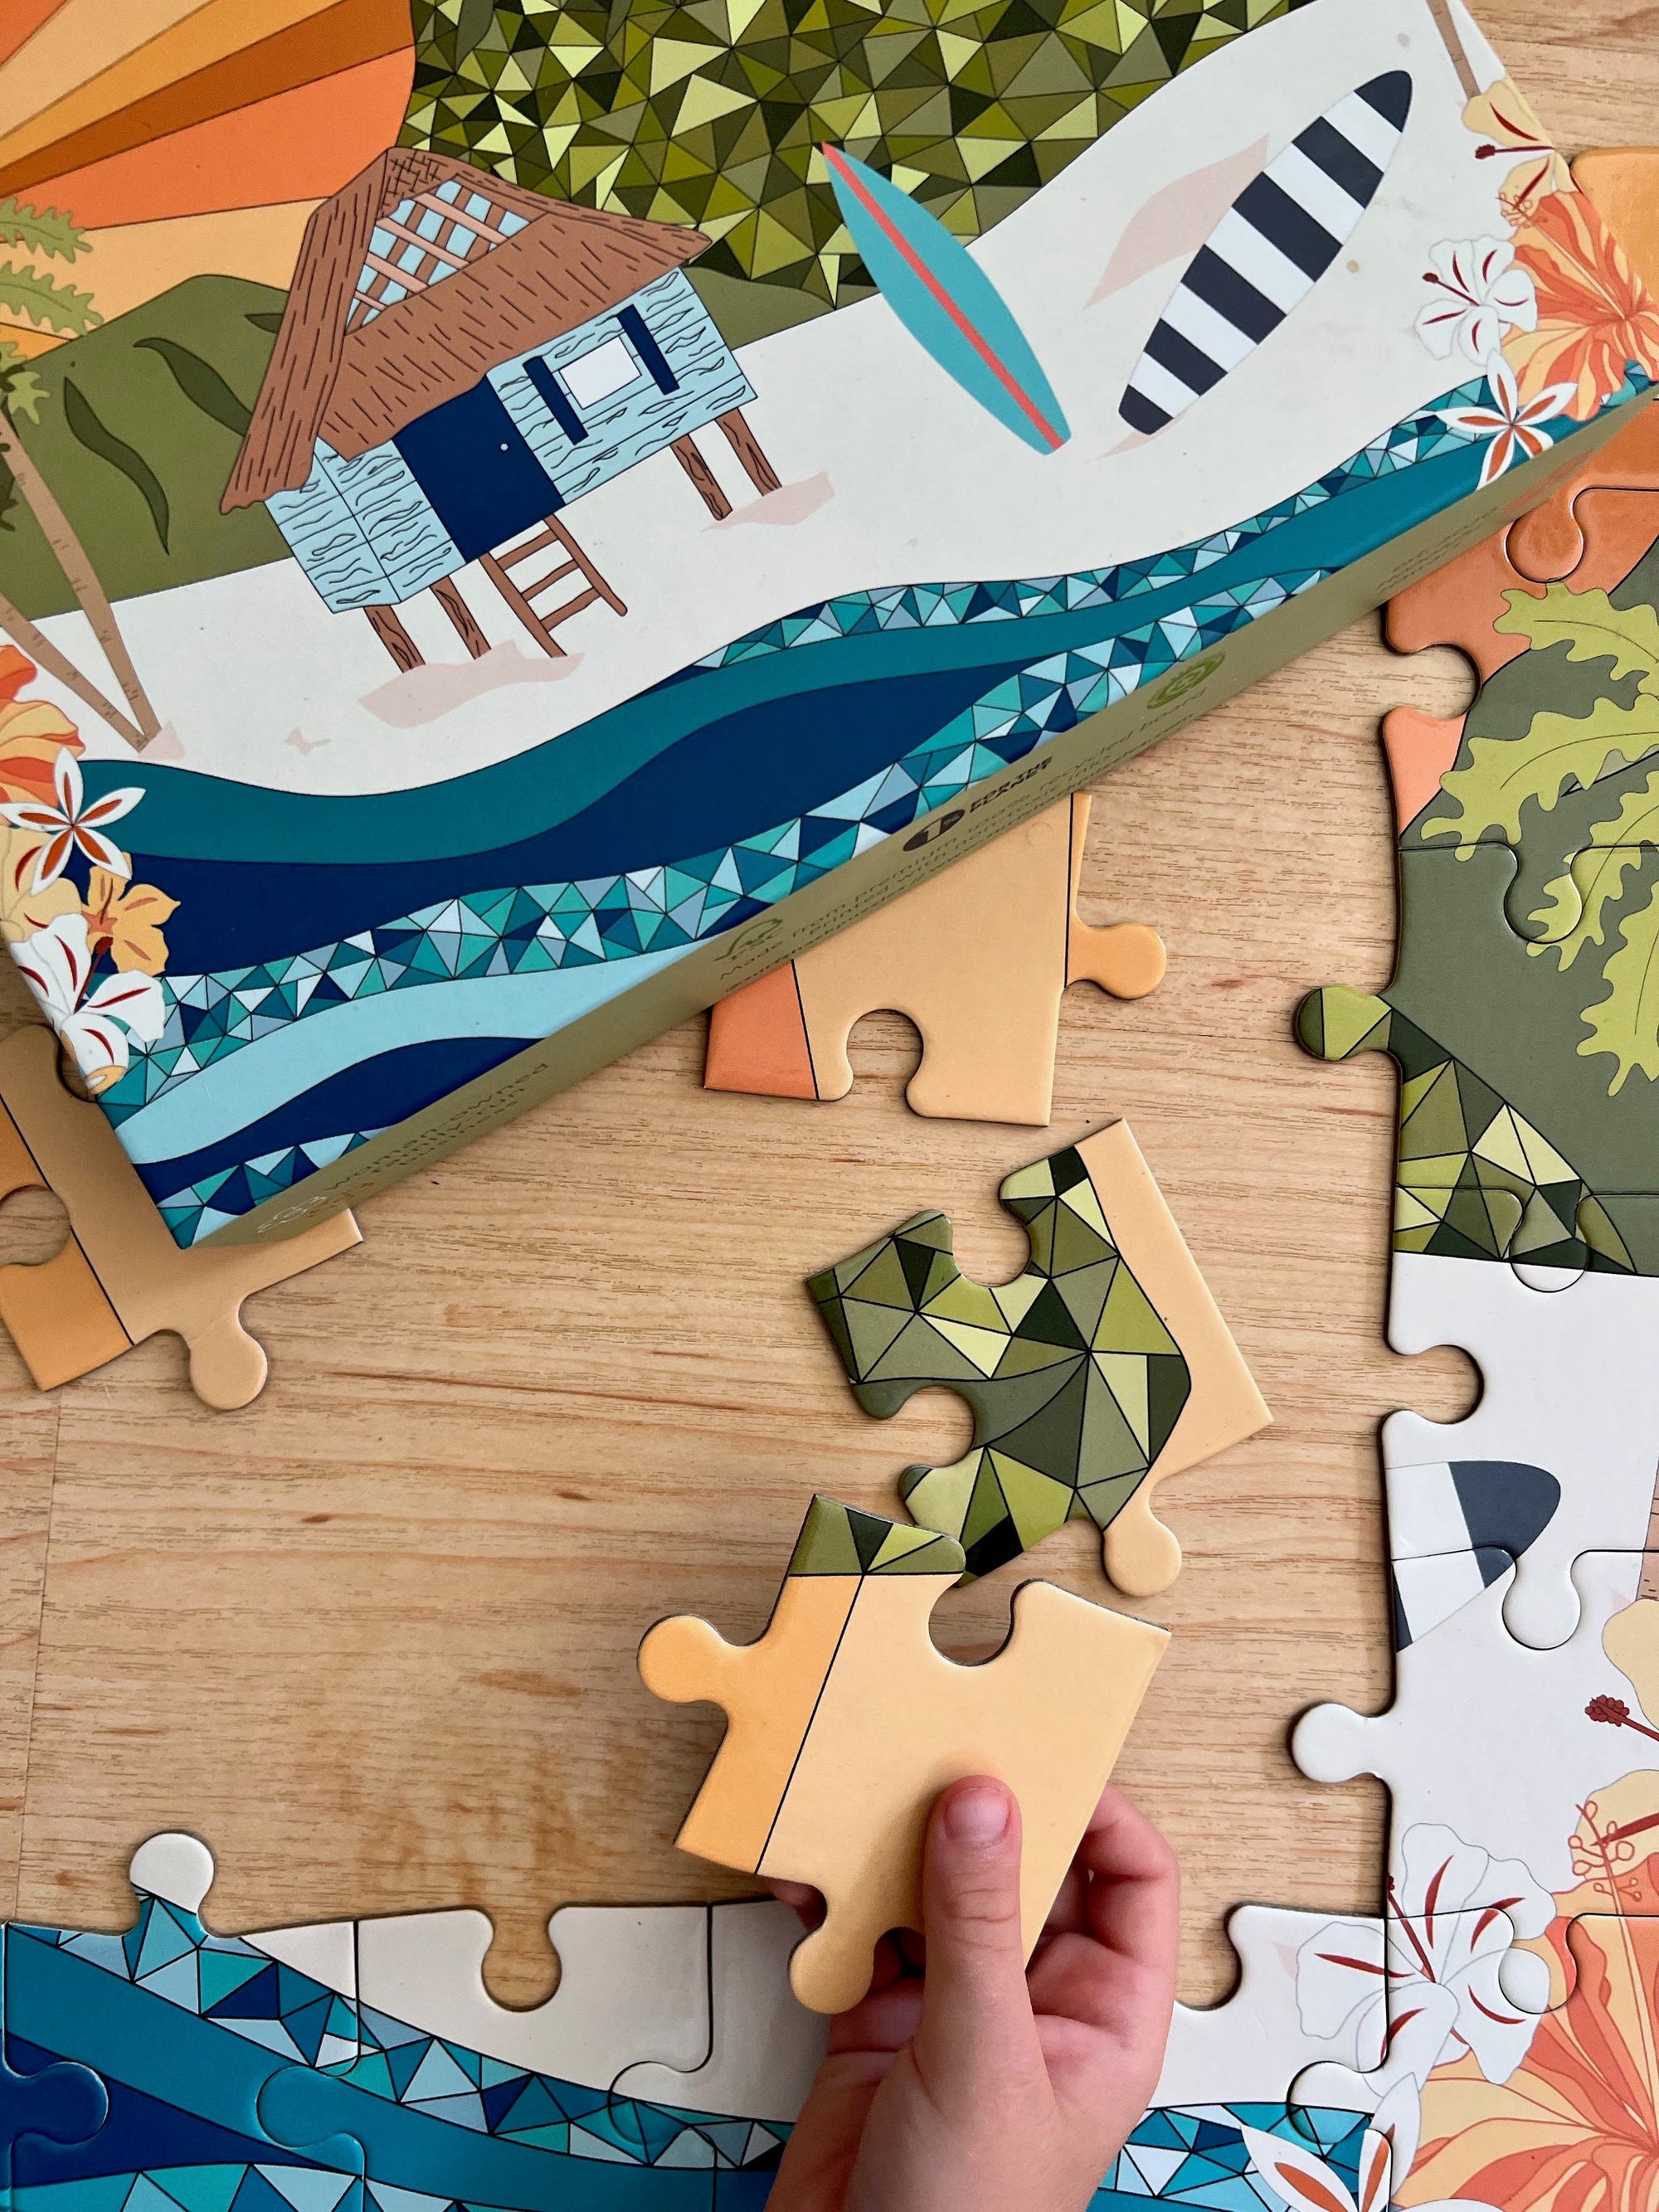 Pop-Up Mākeke - Surf Shack Puzzle - Stay Awhile by The Happy Sea Kid's Puzzle - In Progress